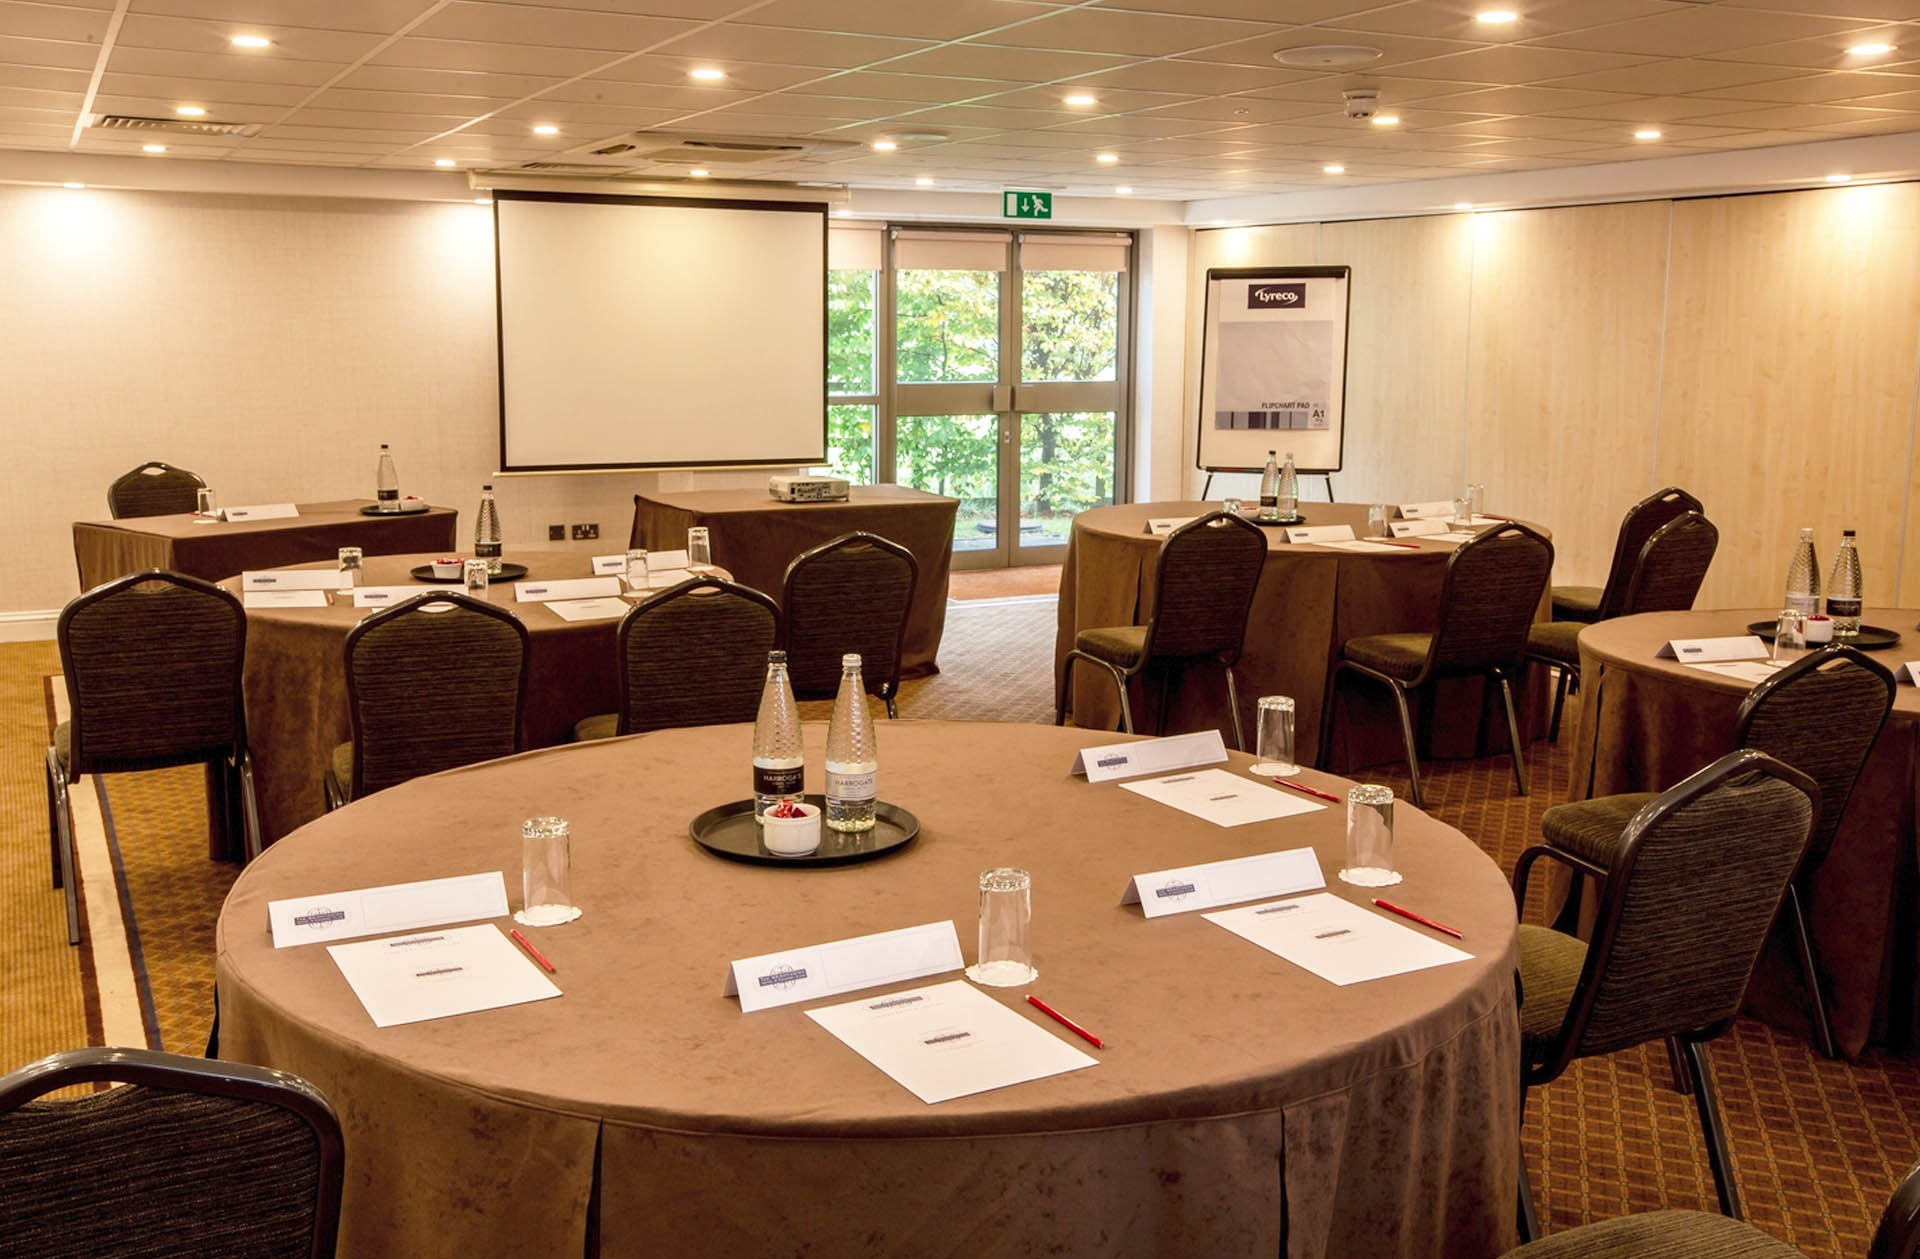 Partridge Suite Meetings at the Wrightington Hotel Health Club and Spa